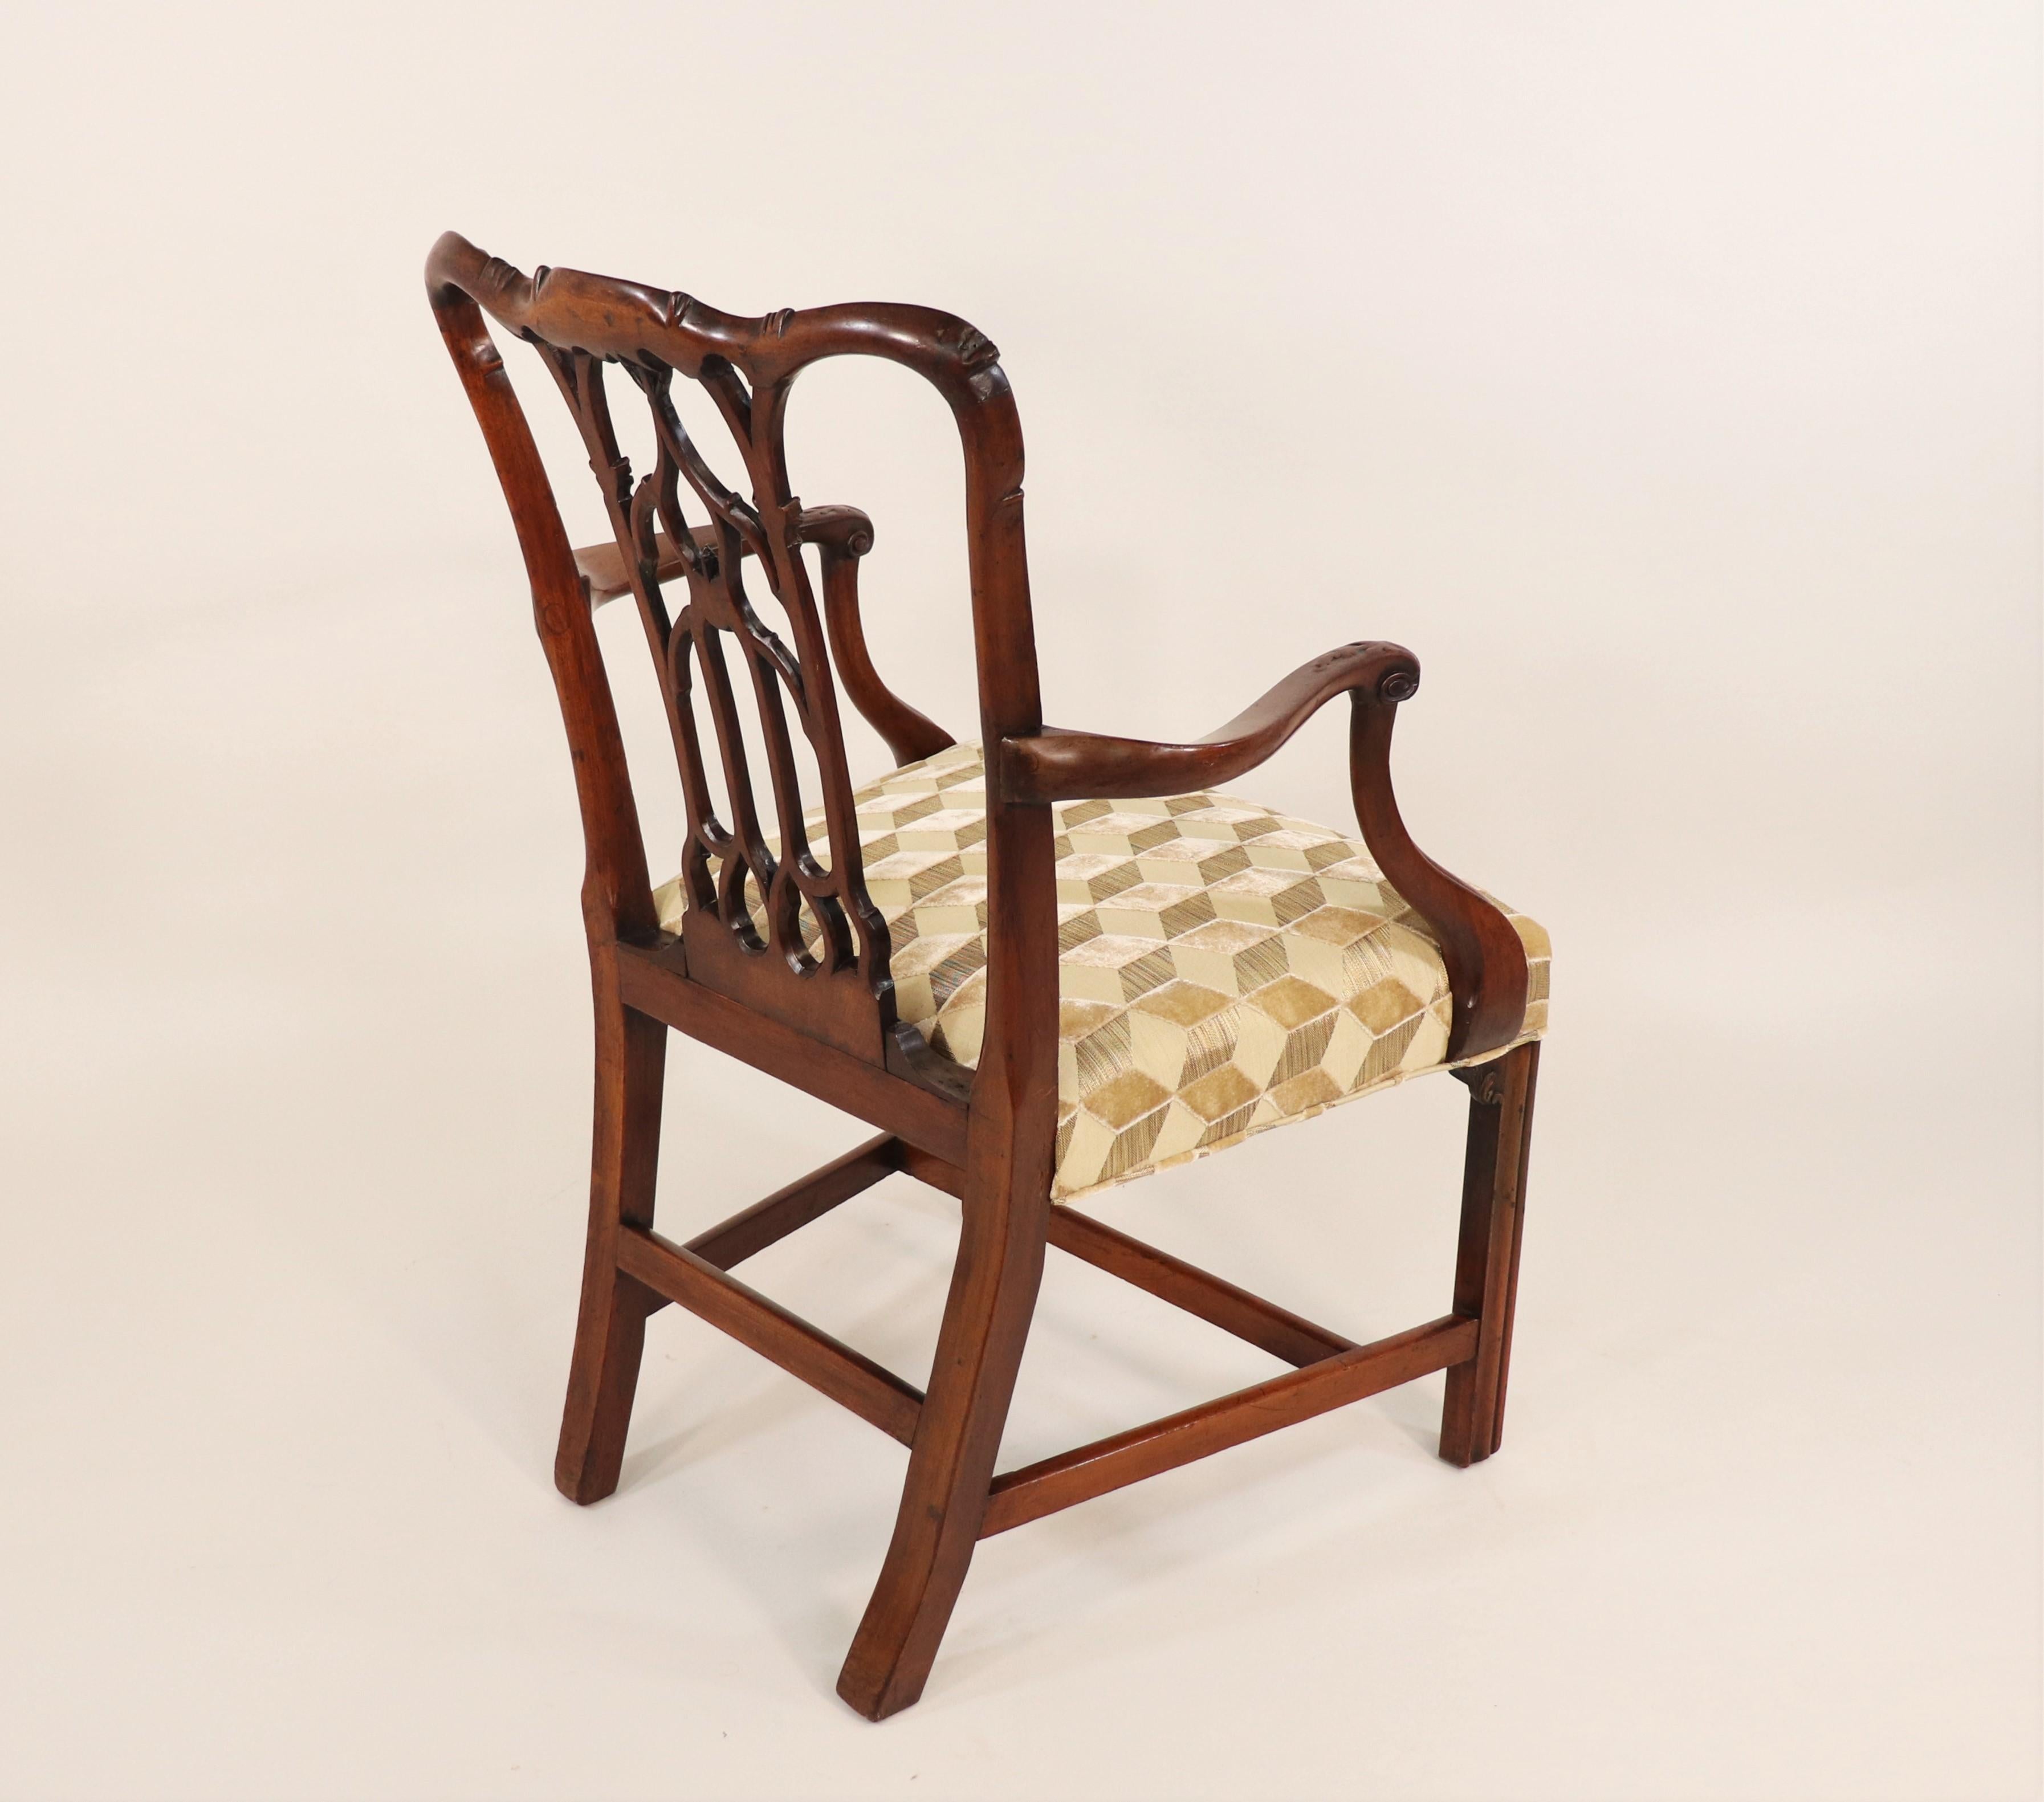 Circa 1750, English Georgian ii Period Mahogany Armchair with Modern Fabric In Good Condition For Sale In Chicago, IL